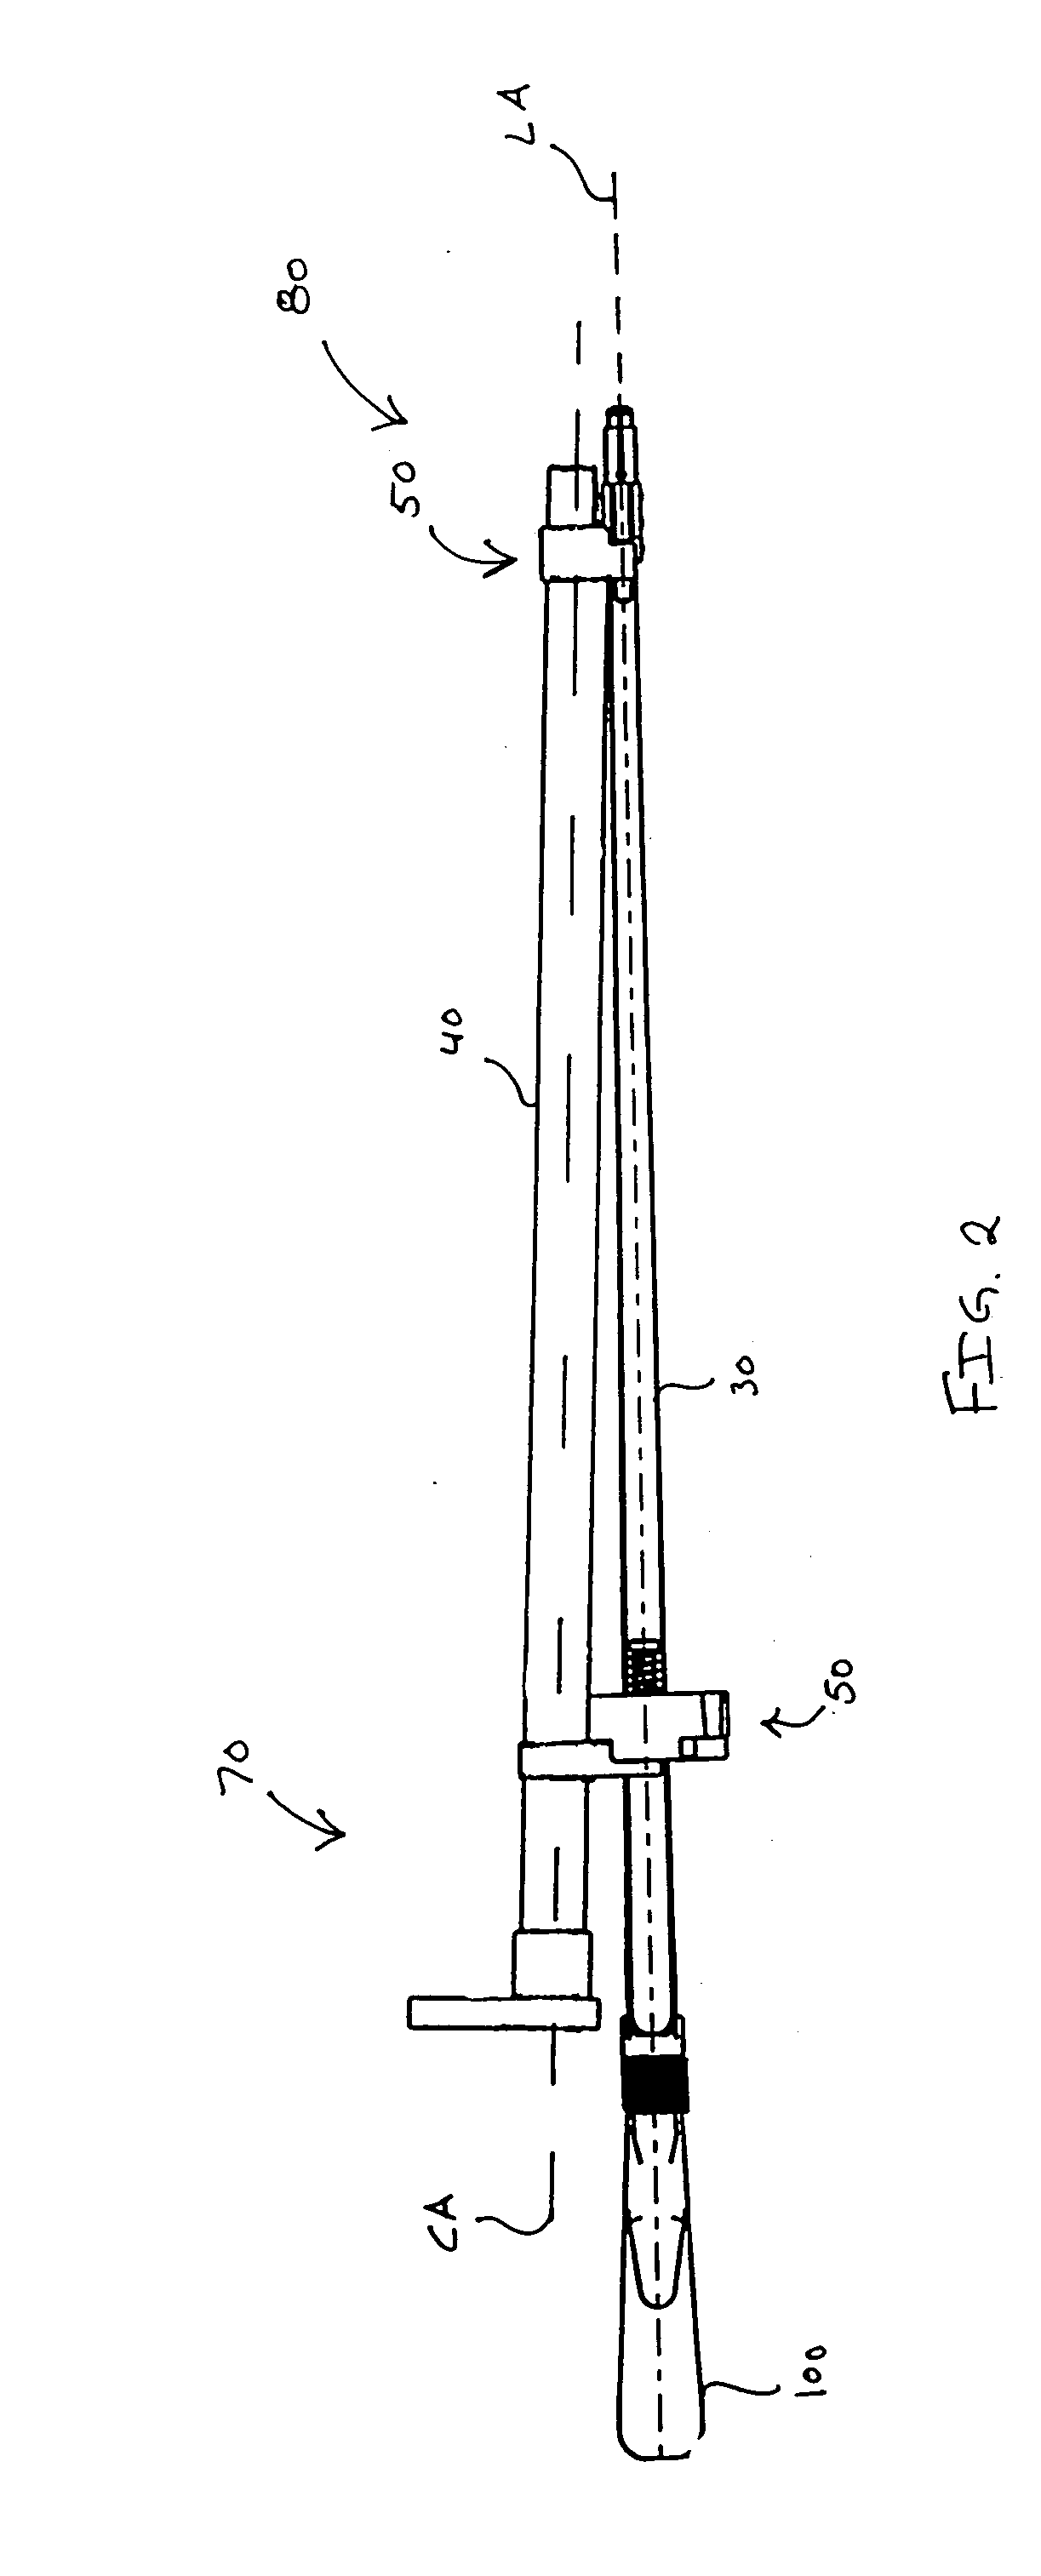 Drill guide assembly for a bone fixation device